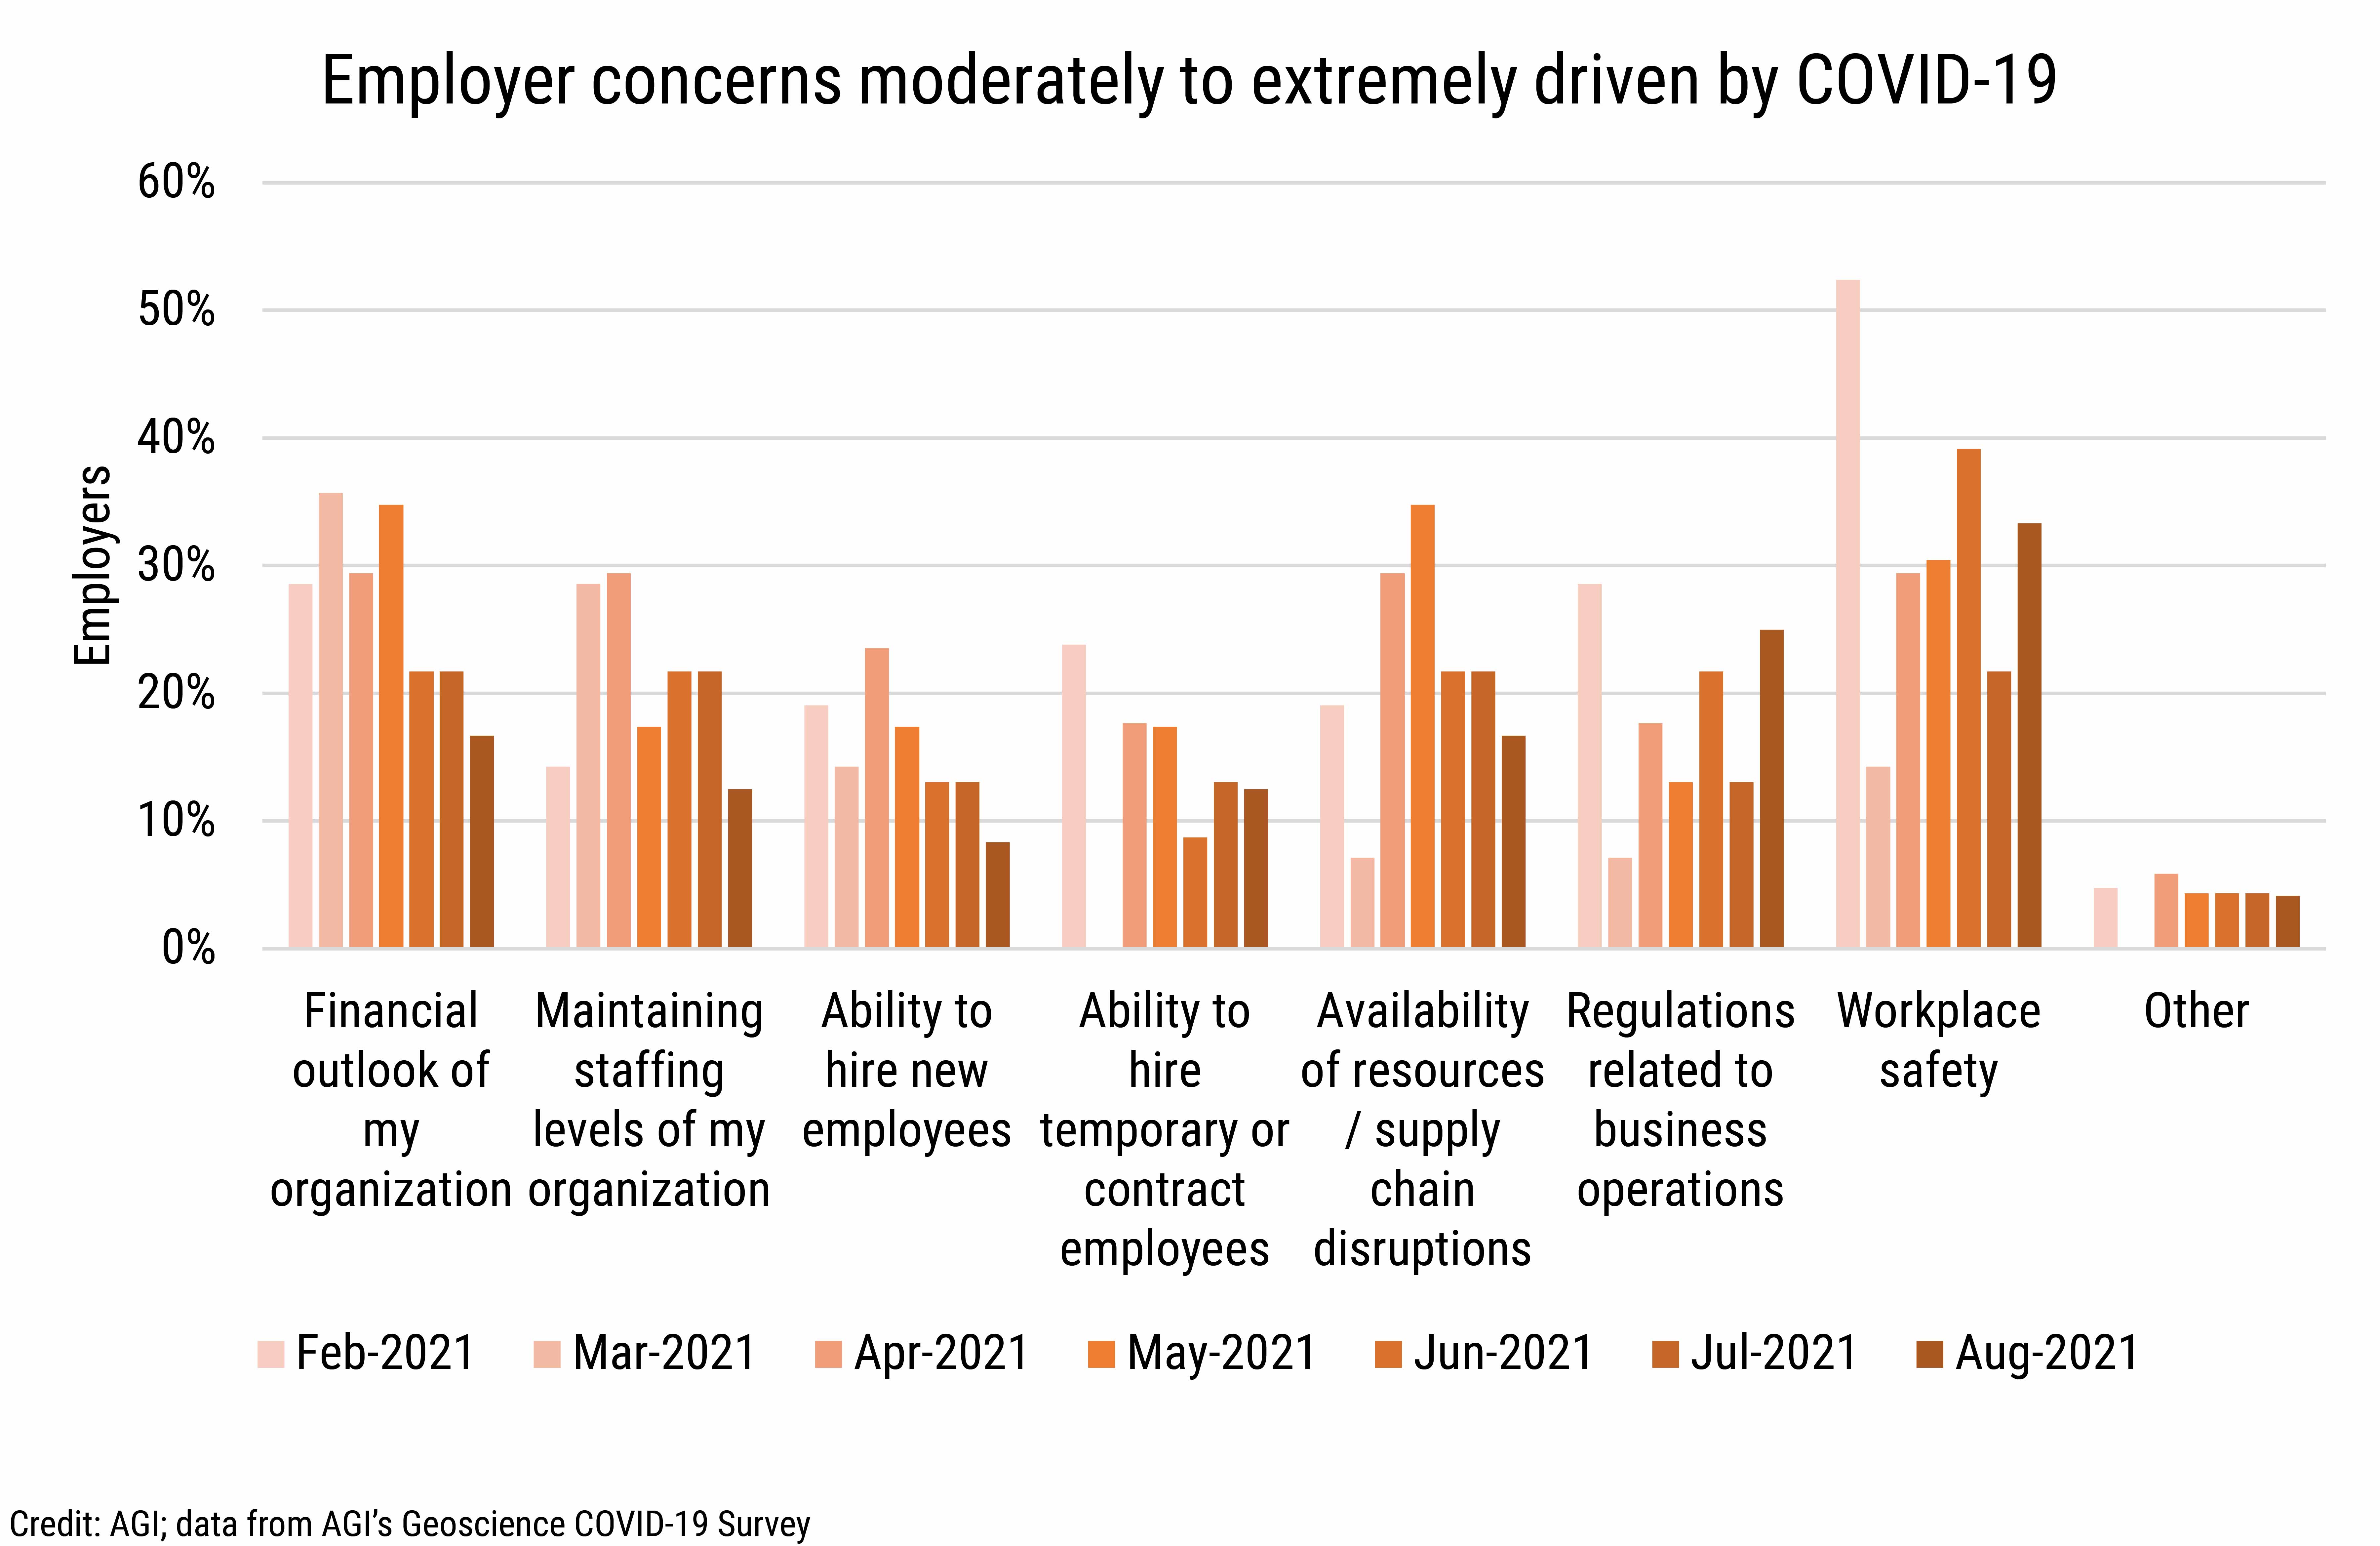 DB_2021-029 chart 06: Employer concerns moderately to extremely driven by COVID-19 (Credit: AGI; data from AGI's Geoscience COVID-19 Survey)